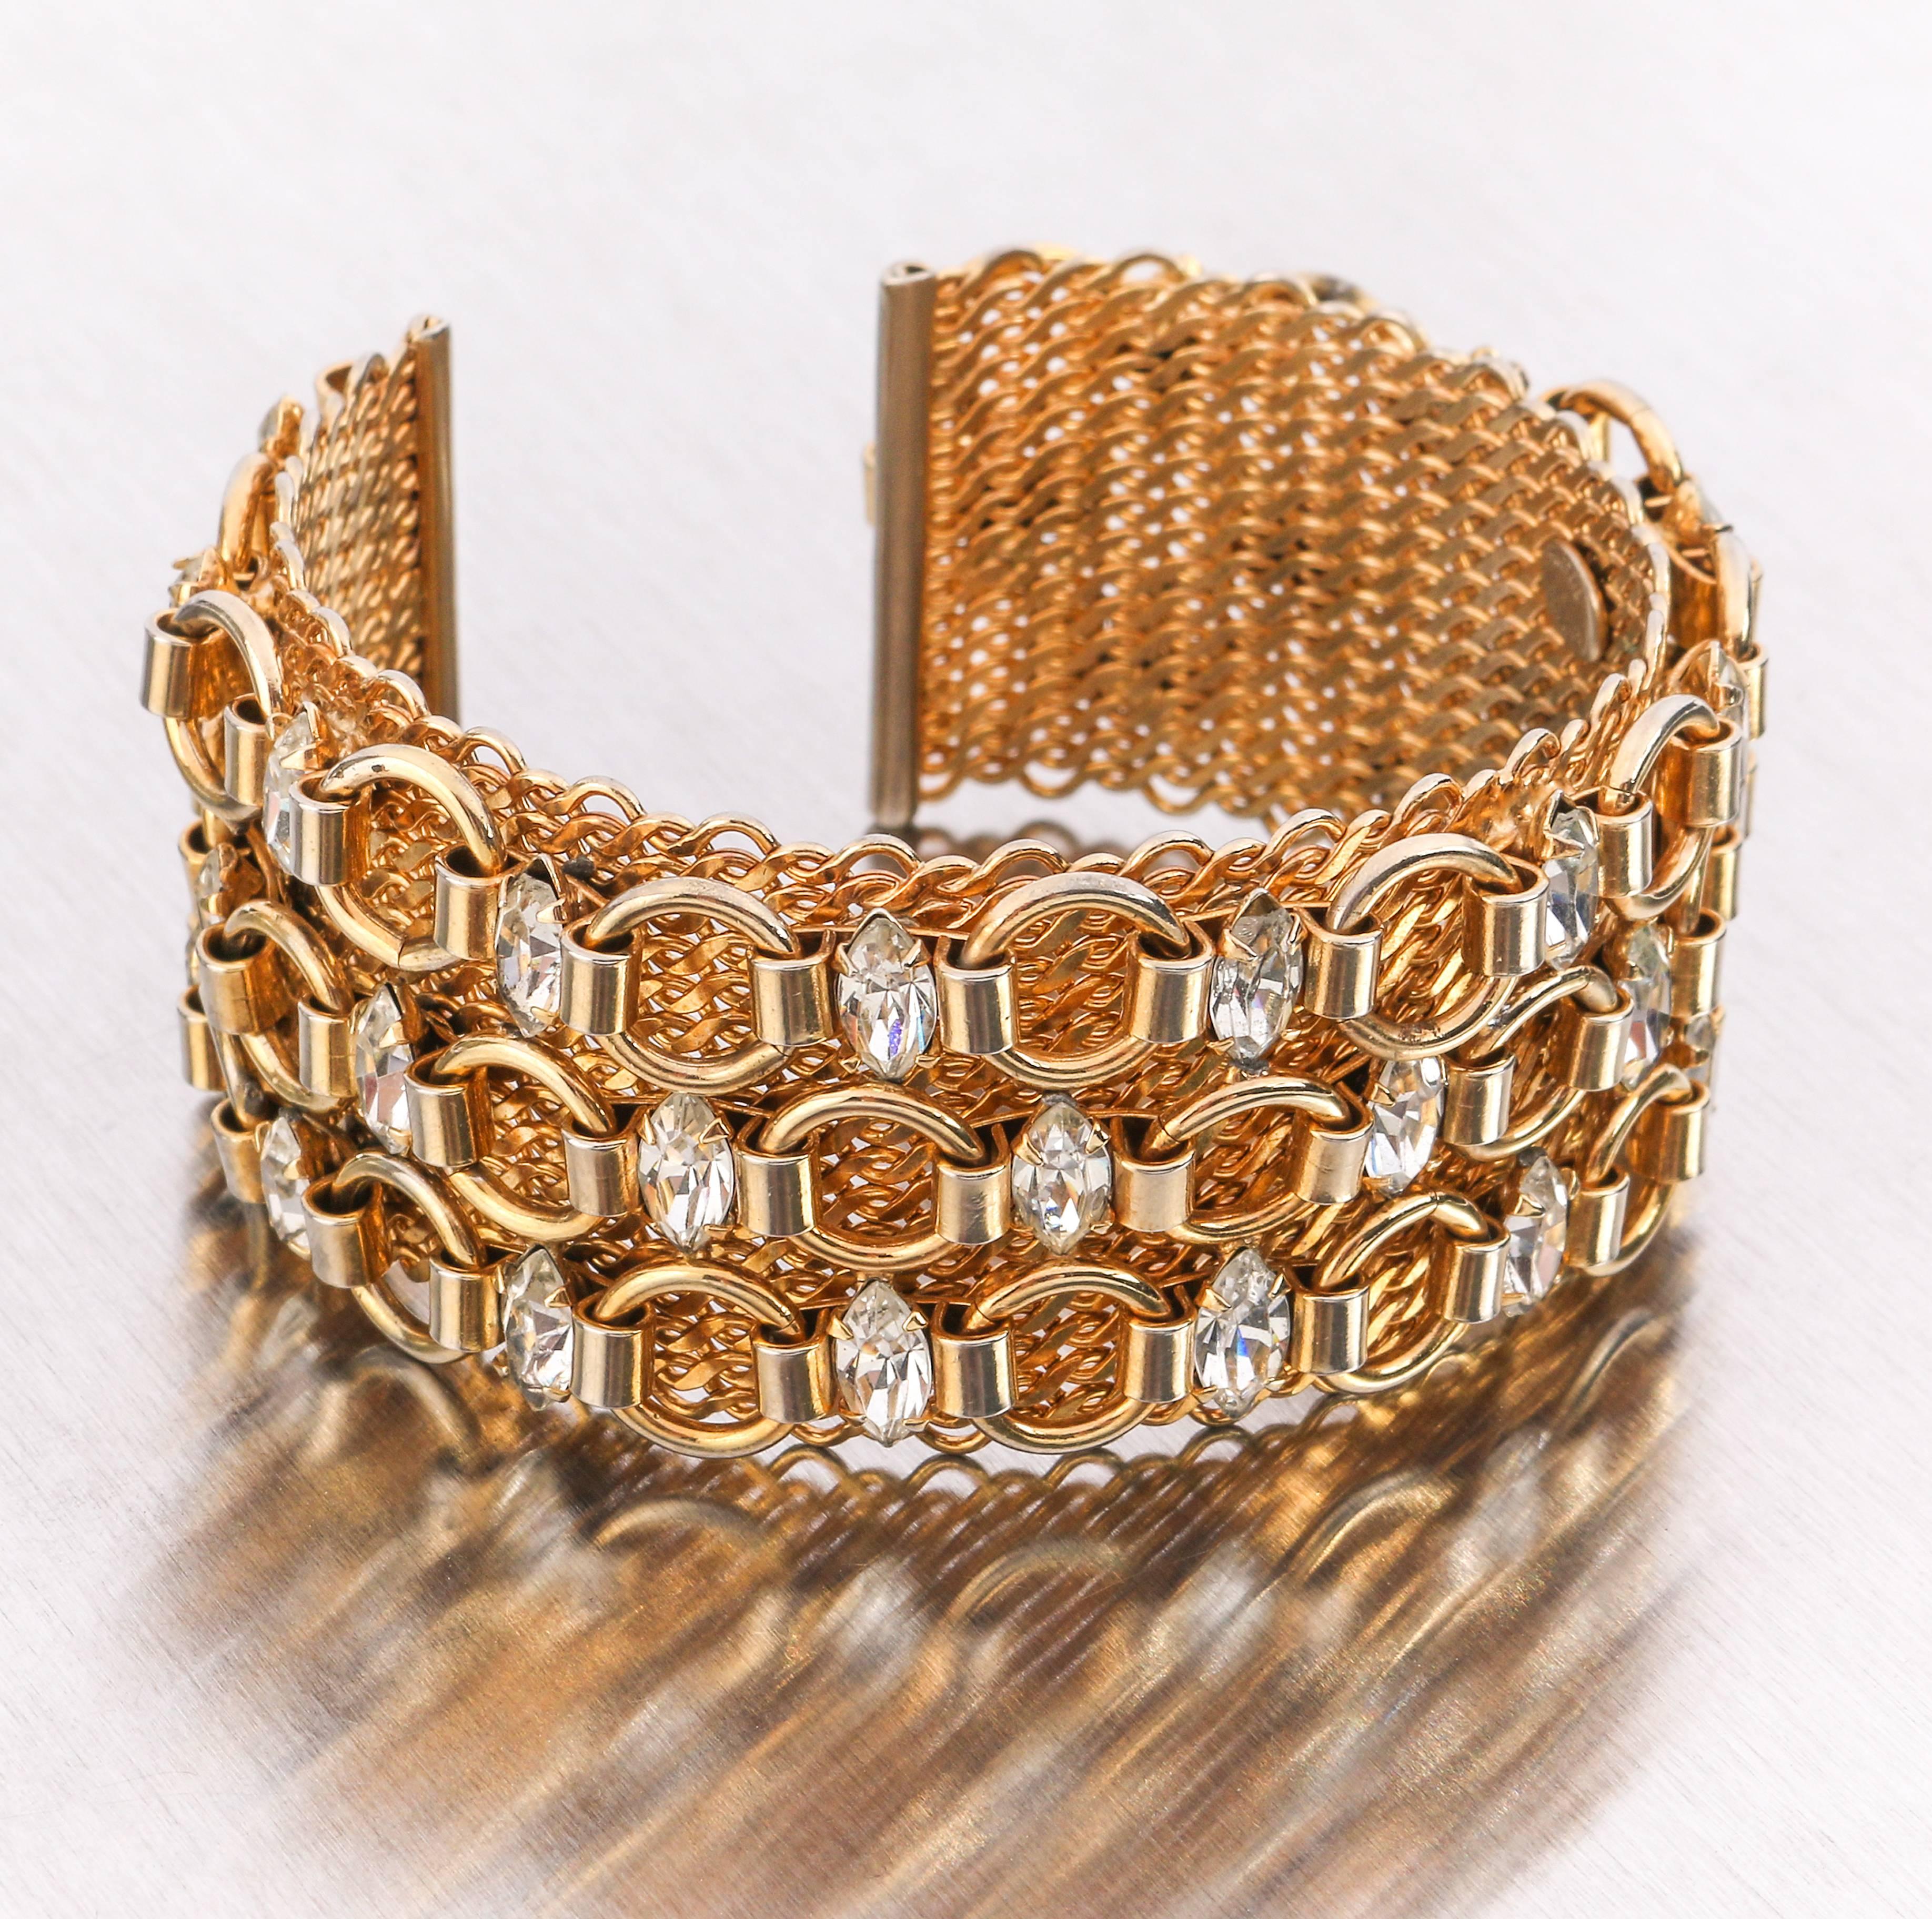 Vintage c.1960's Hattie Carnegie gold tone mesh and chain link cuff bracelet with marquise cut crystal colored rhinestones. Wide mesh cuff measures approximately 1 1/4